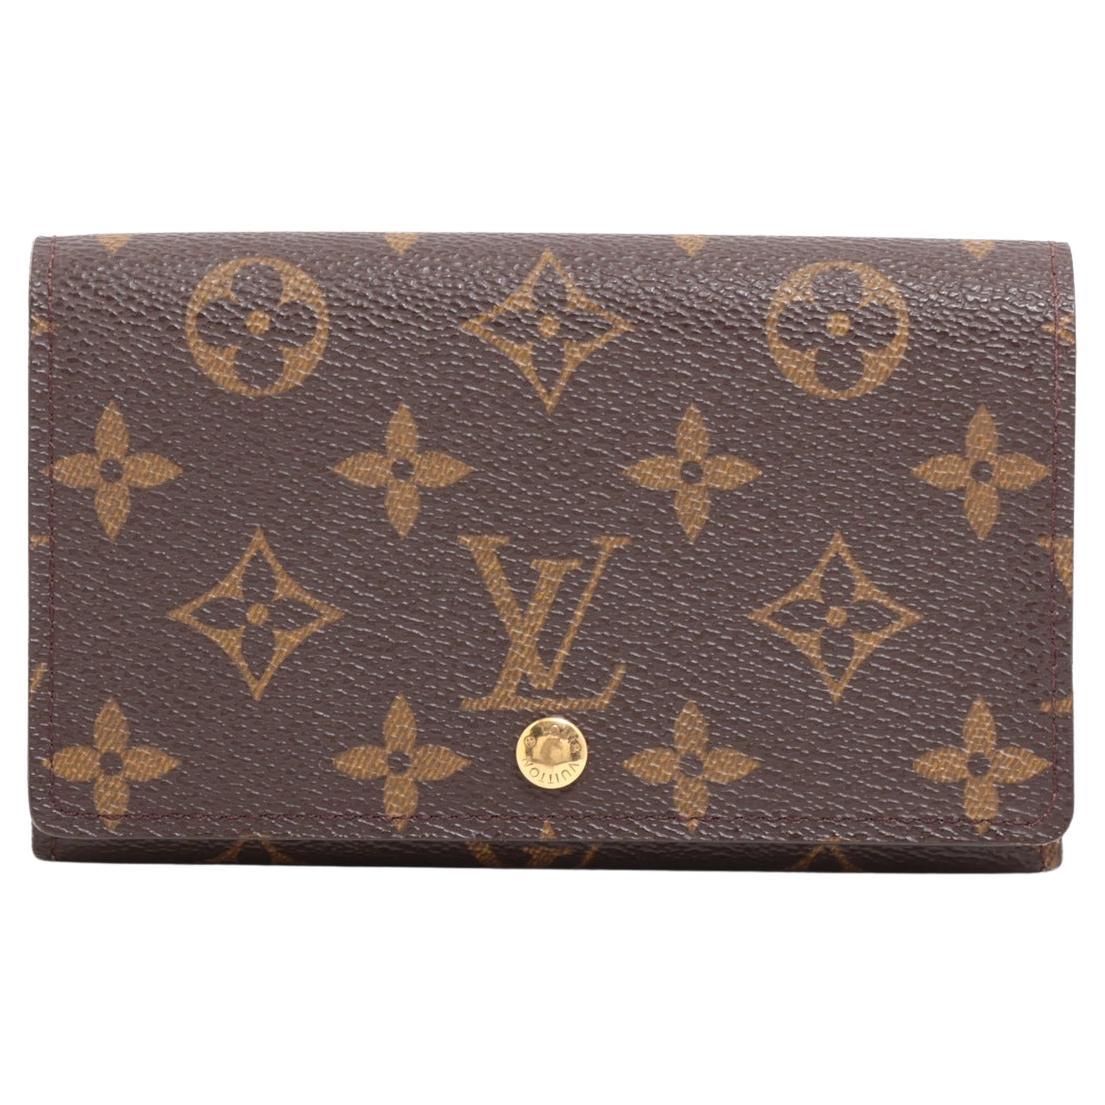 Are Louis Vuitton wallets RFLD protected?